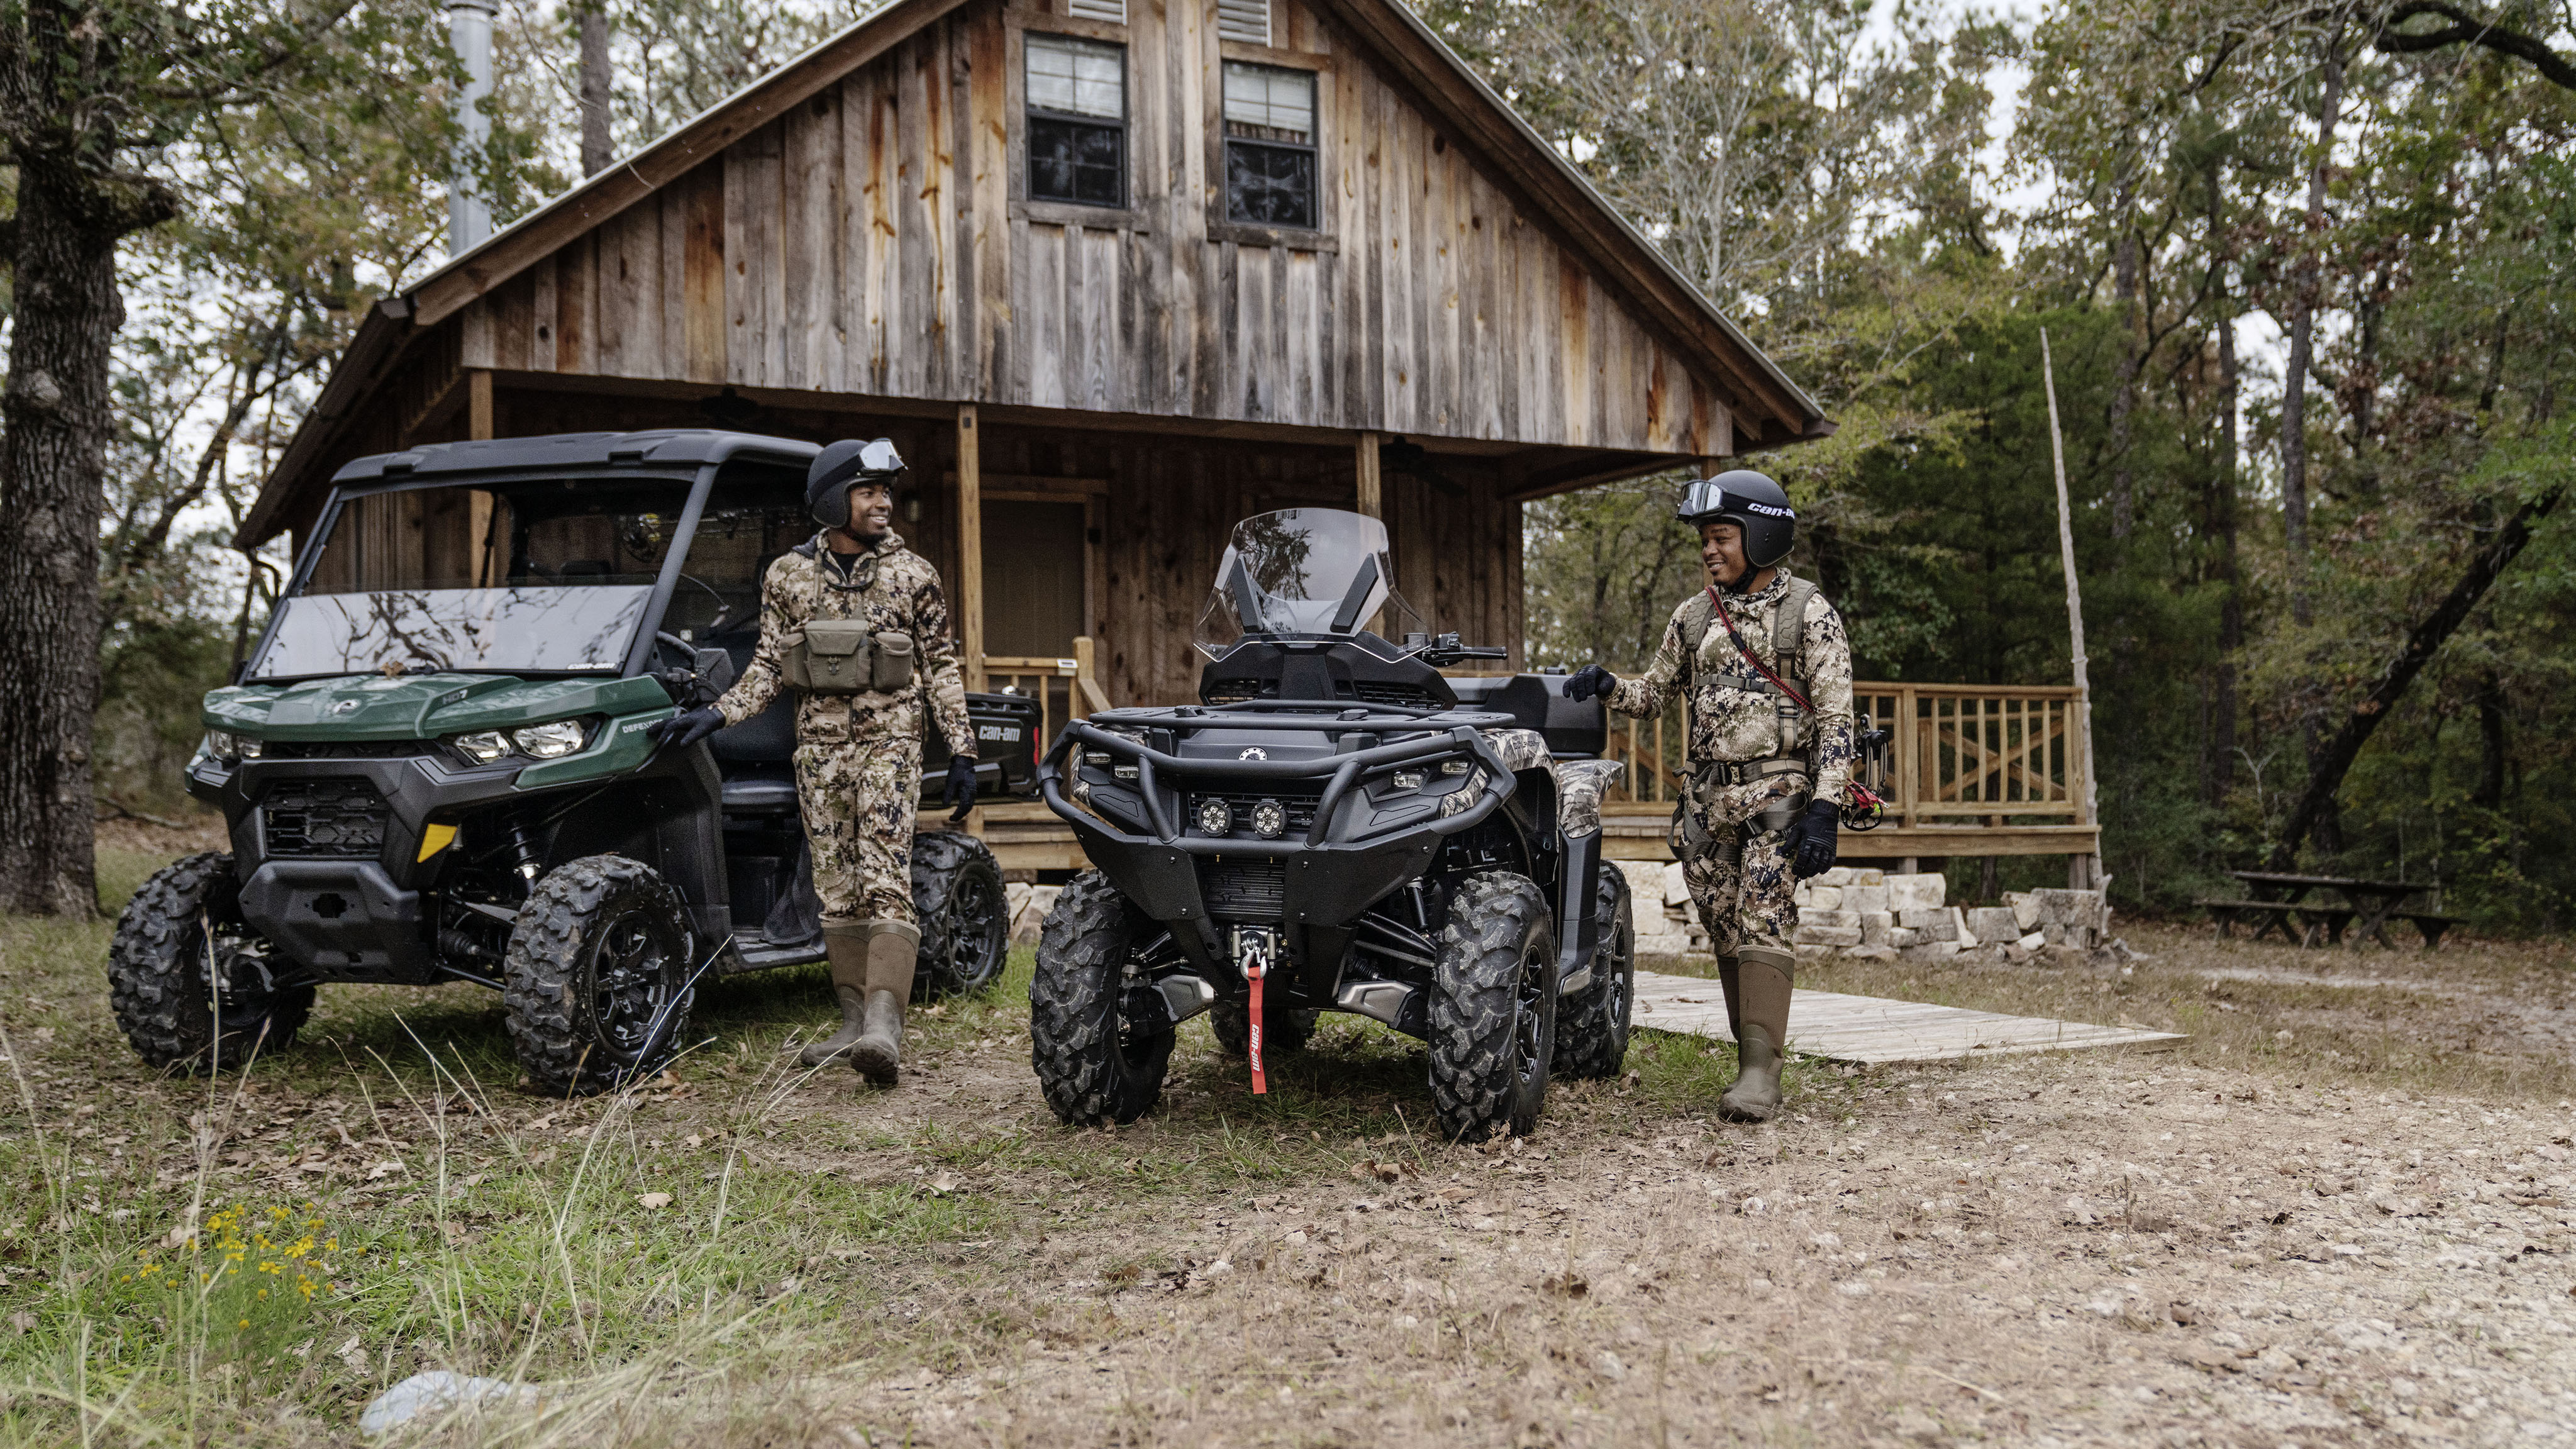 Hunters with their Can-Am Off-Road vehicles